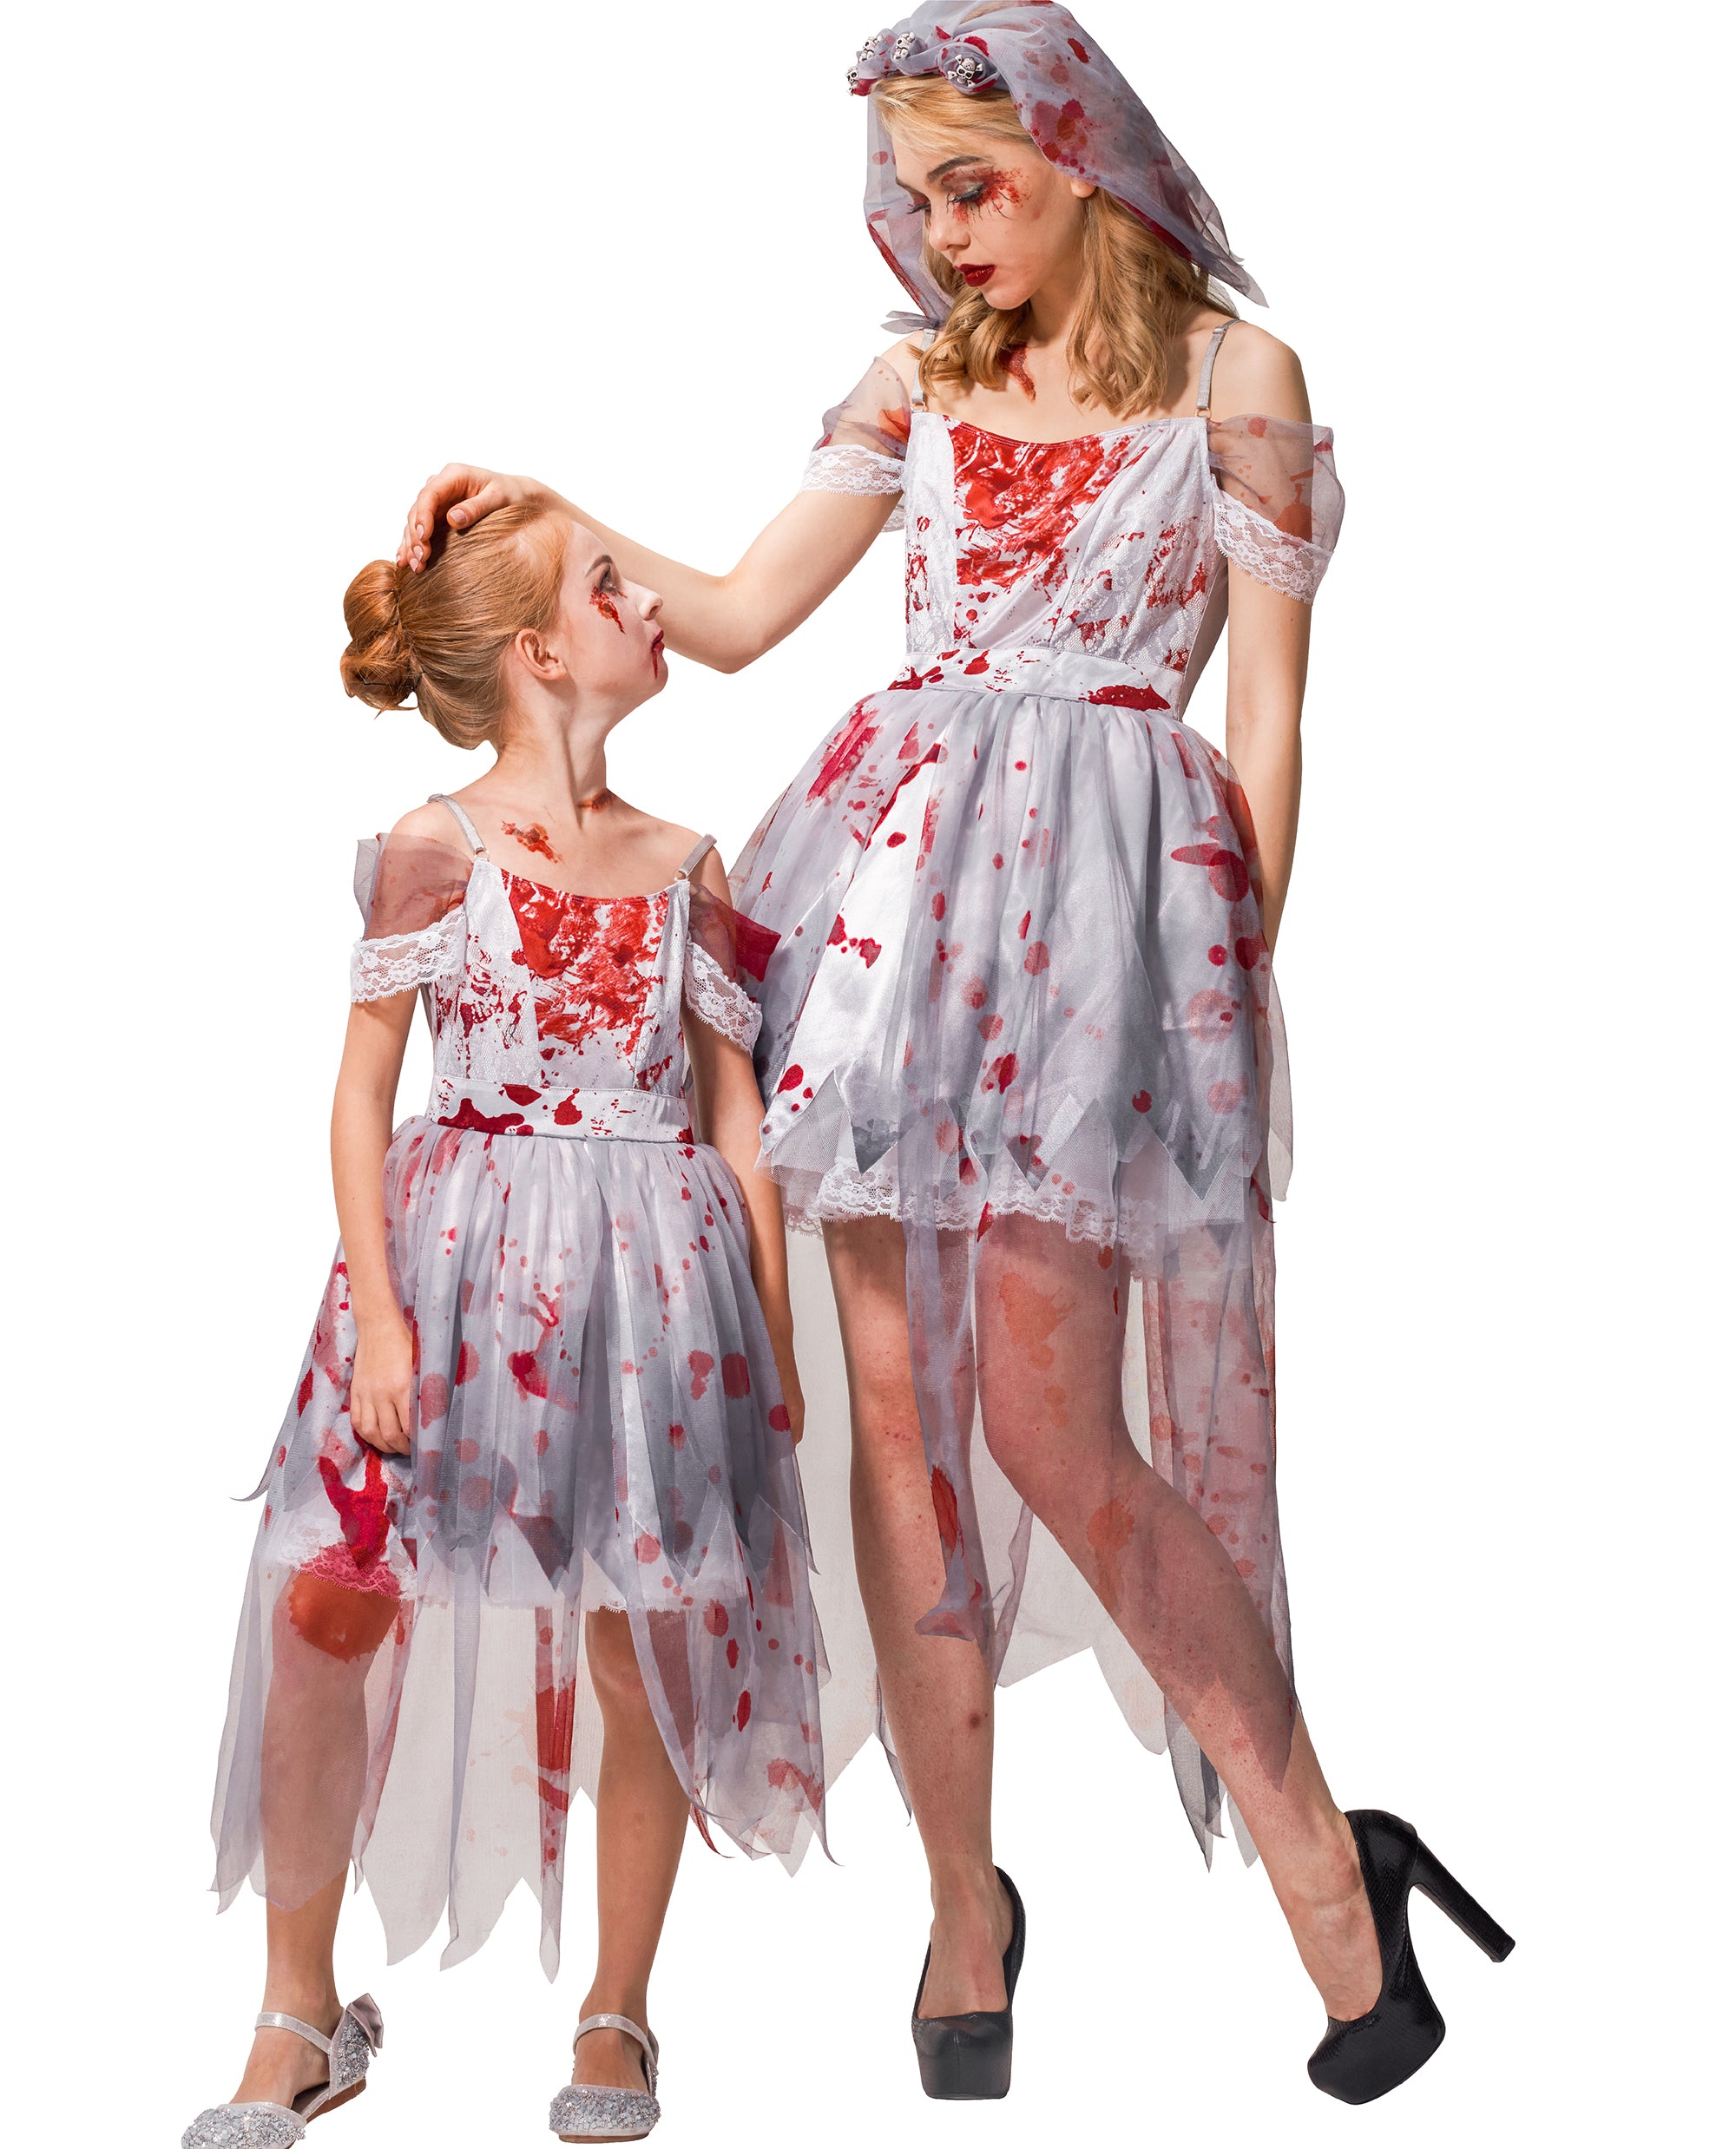 Here Comes The Bride Costume For Girls: #Chasingfireflies $8.99